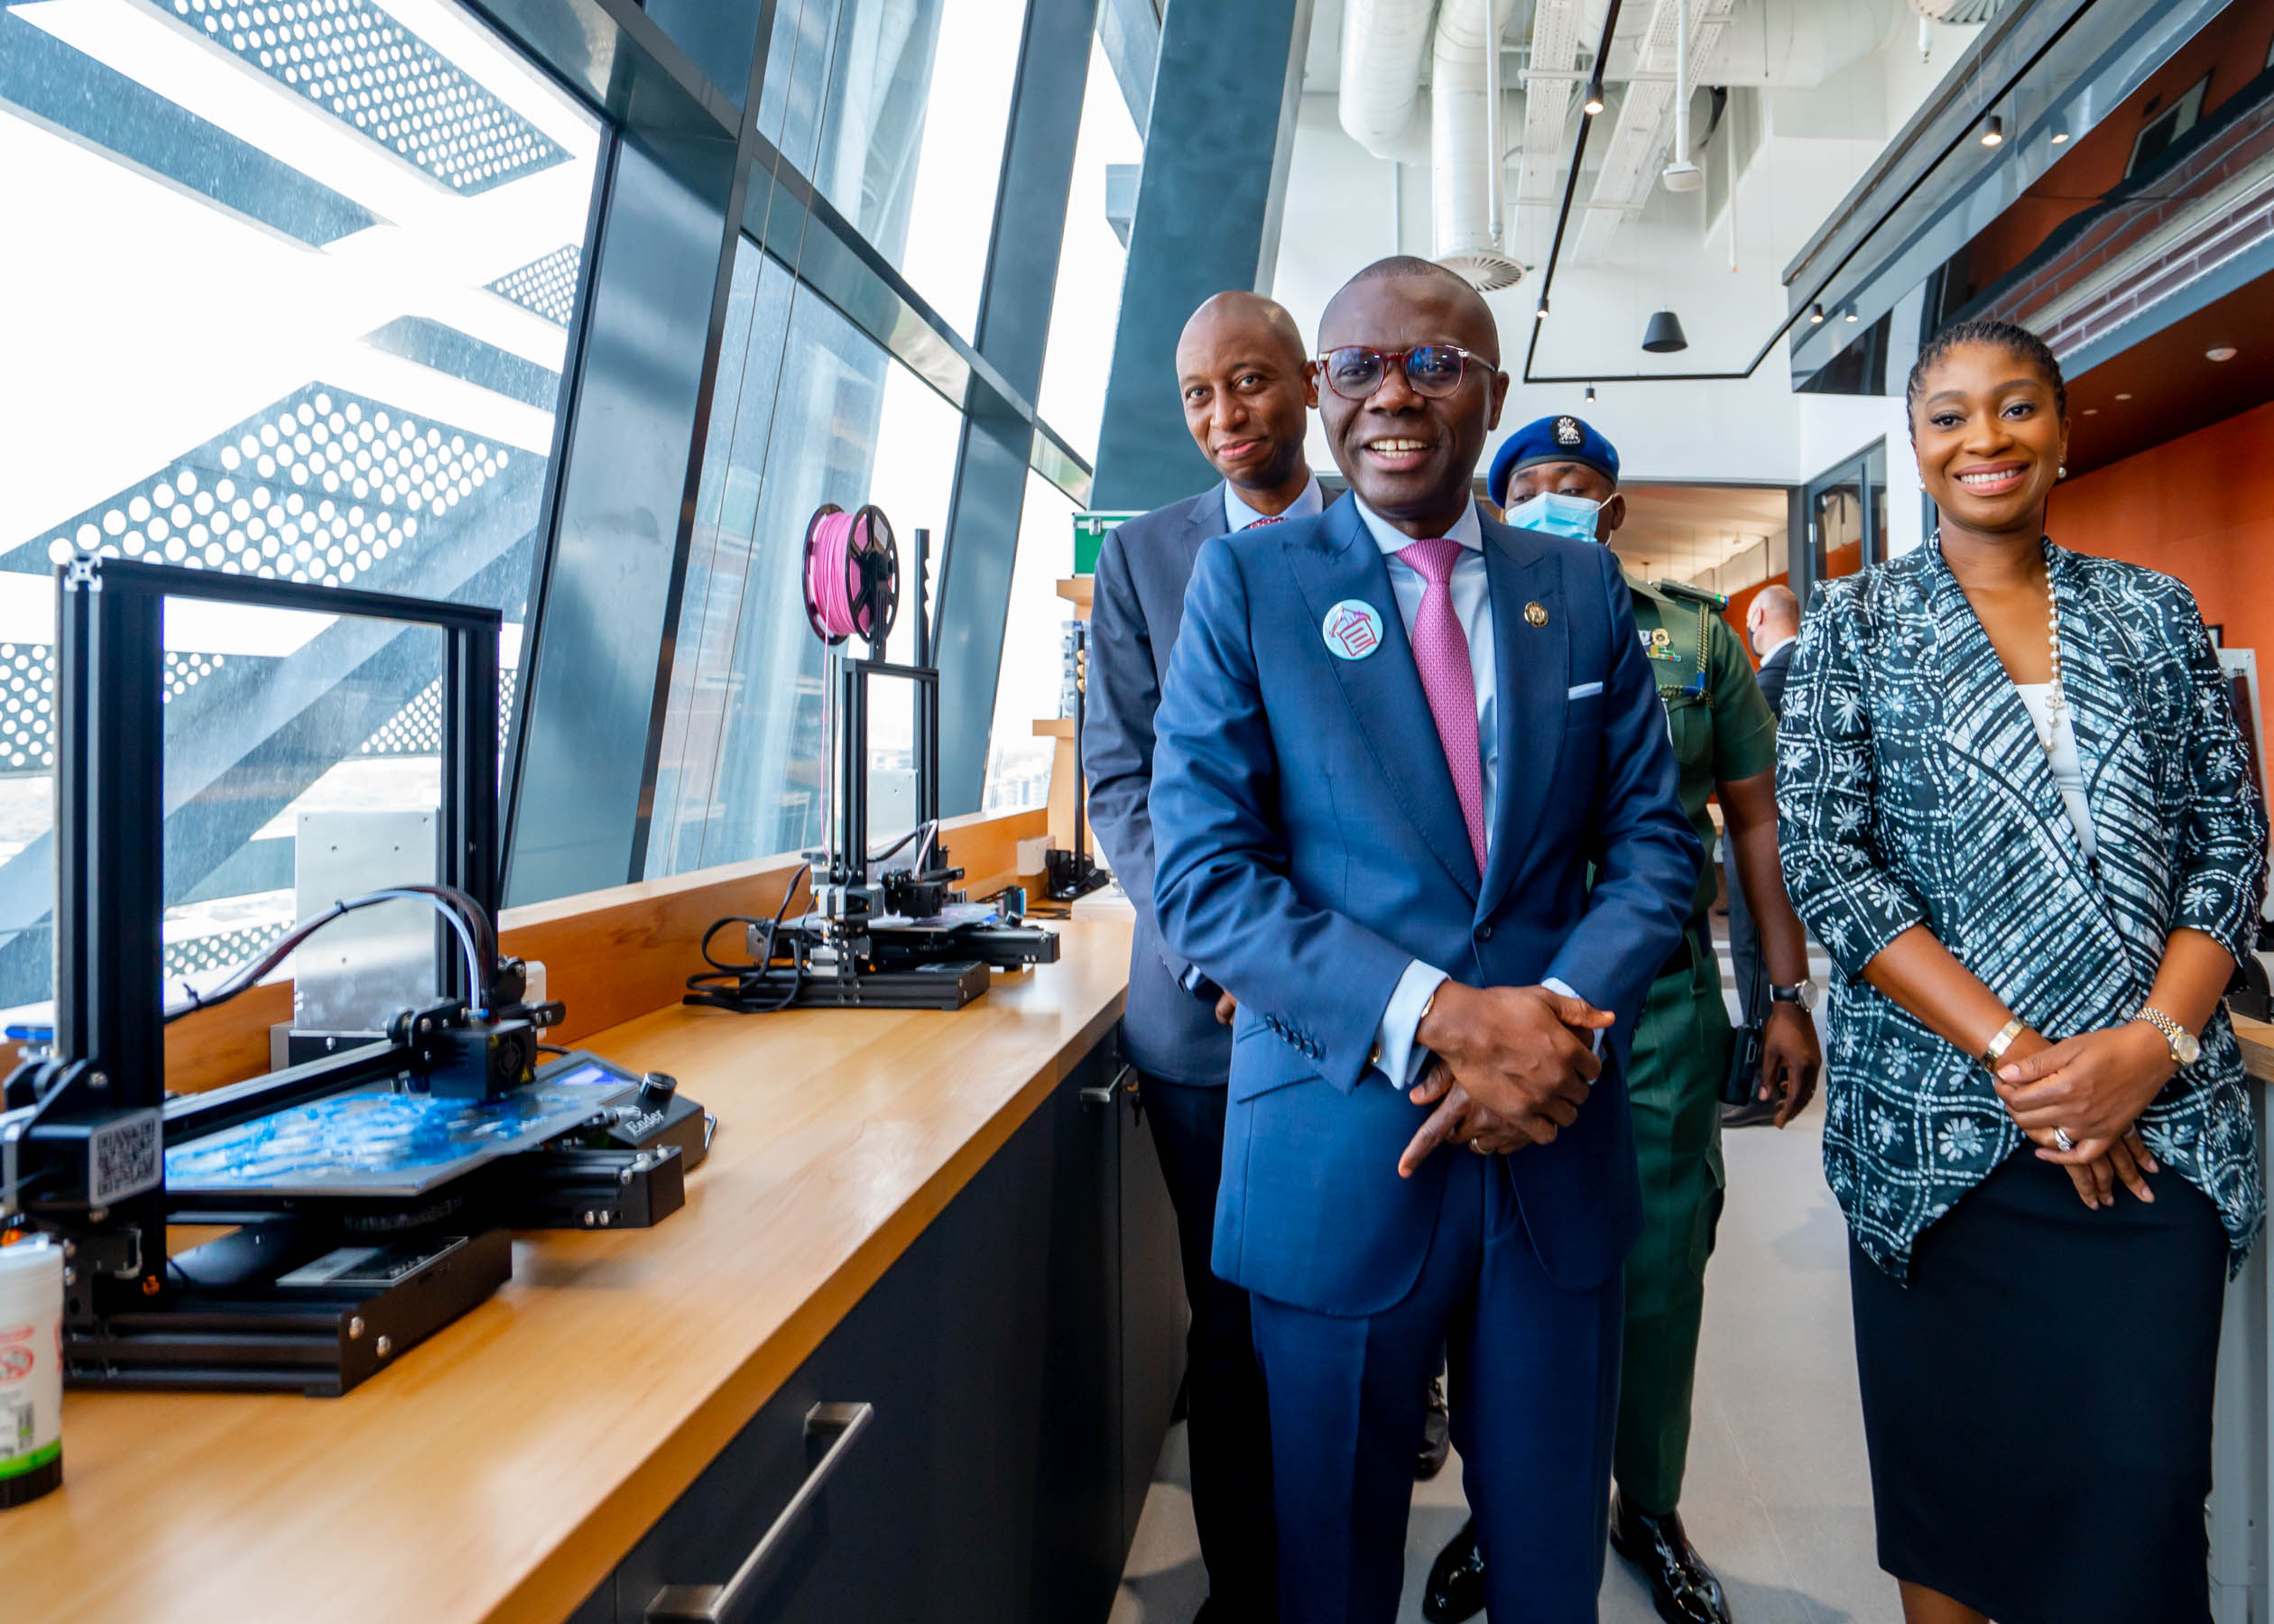 GOV. SANWO-OLU ATTENDS THE OPENING OF MICROSOFT'S NEW FACILITY - AFRICA DEVELOPMENT CENTER (ADC WEST AFRICA) SOFTWARE ENGINEERING OFFICE